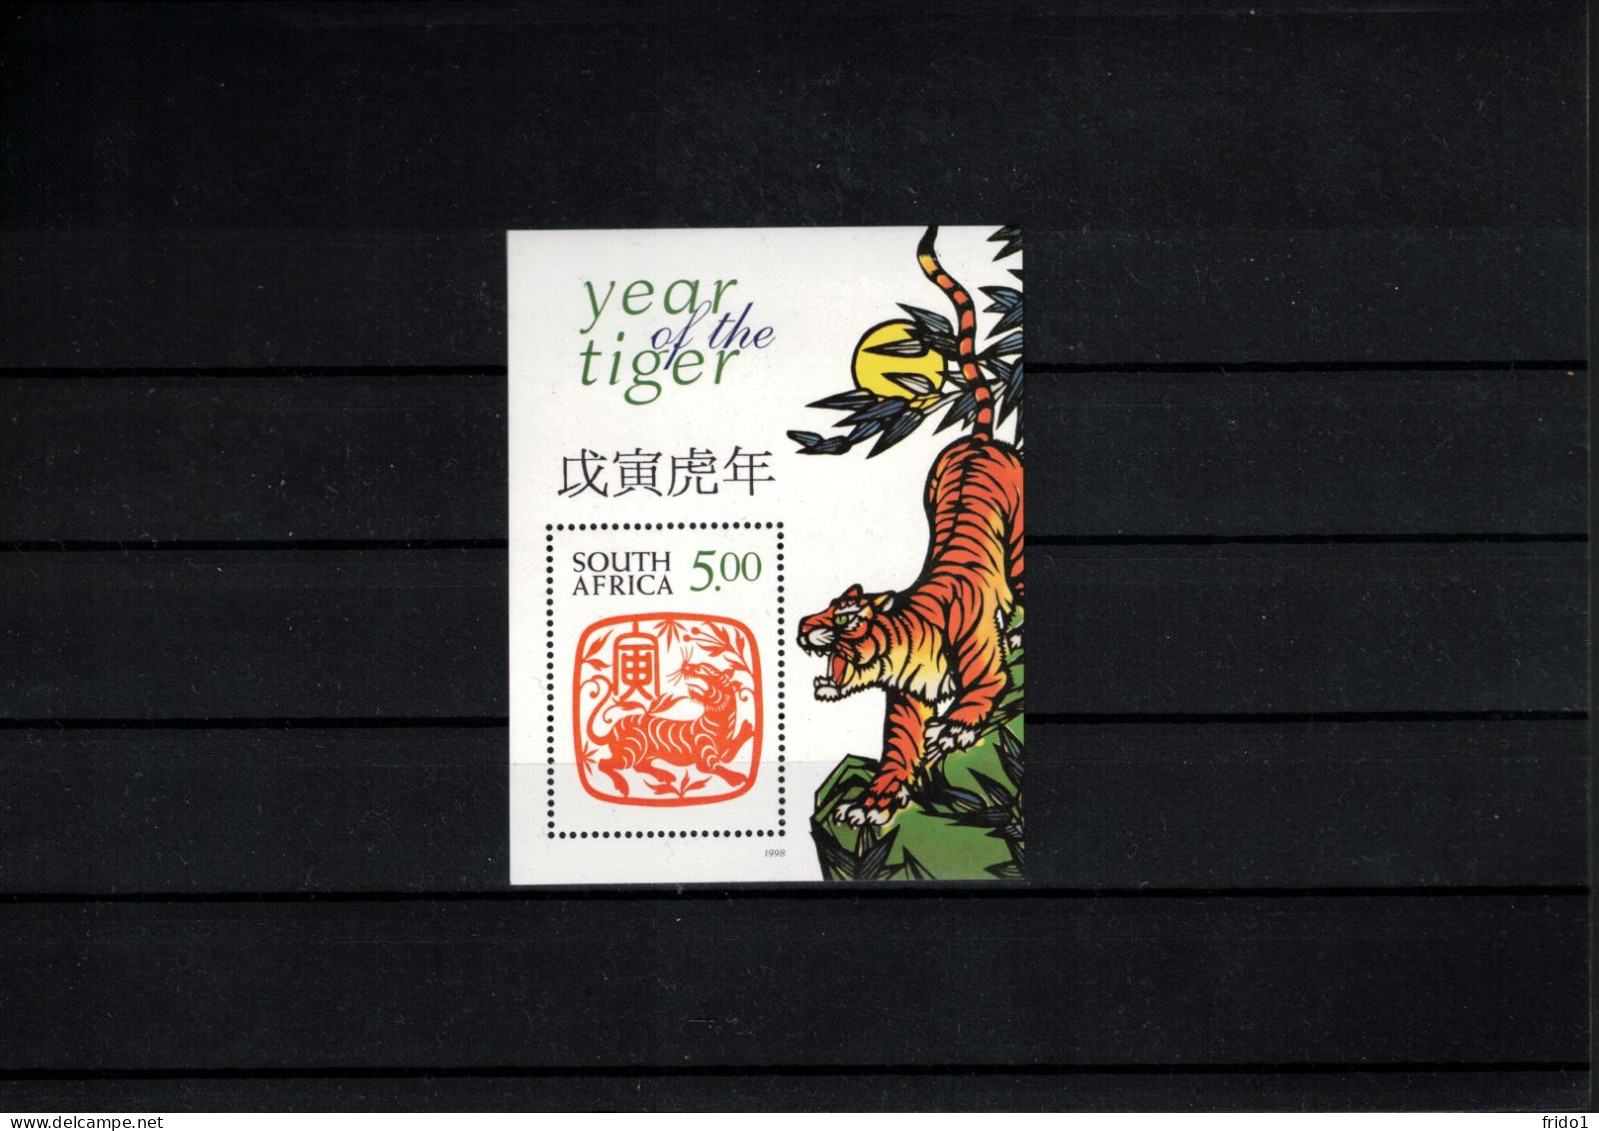 South Africa 1998 Year Of The Tiger Block Postfrisch / MNH - Anno Nuovo Cinese